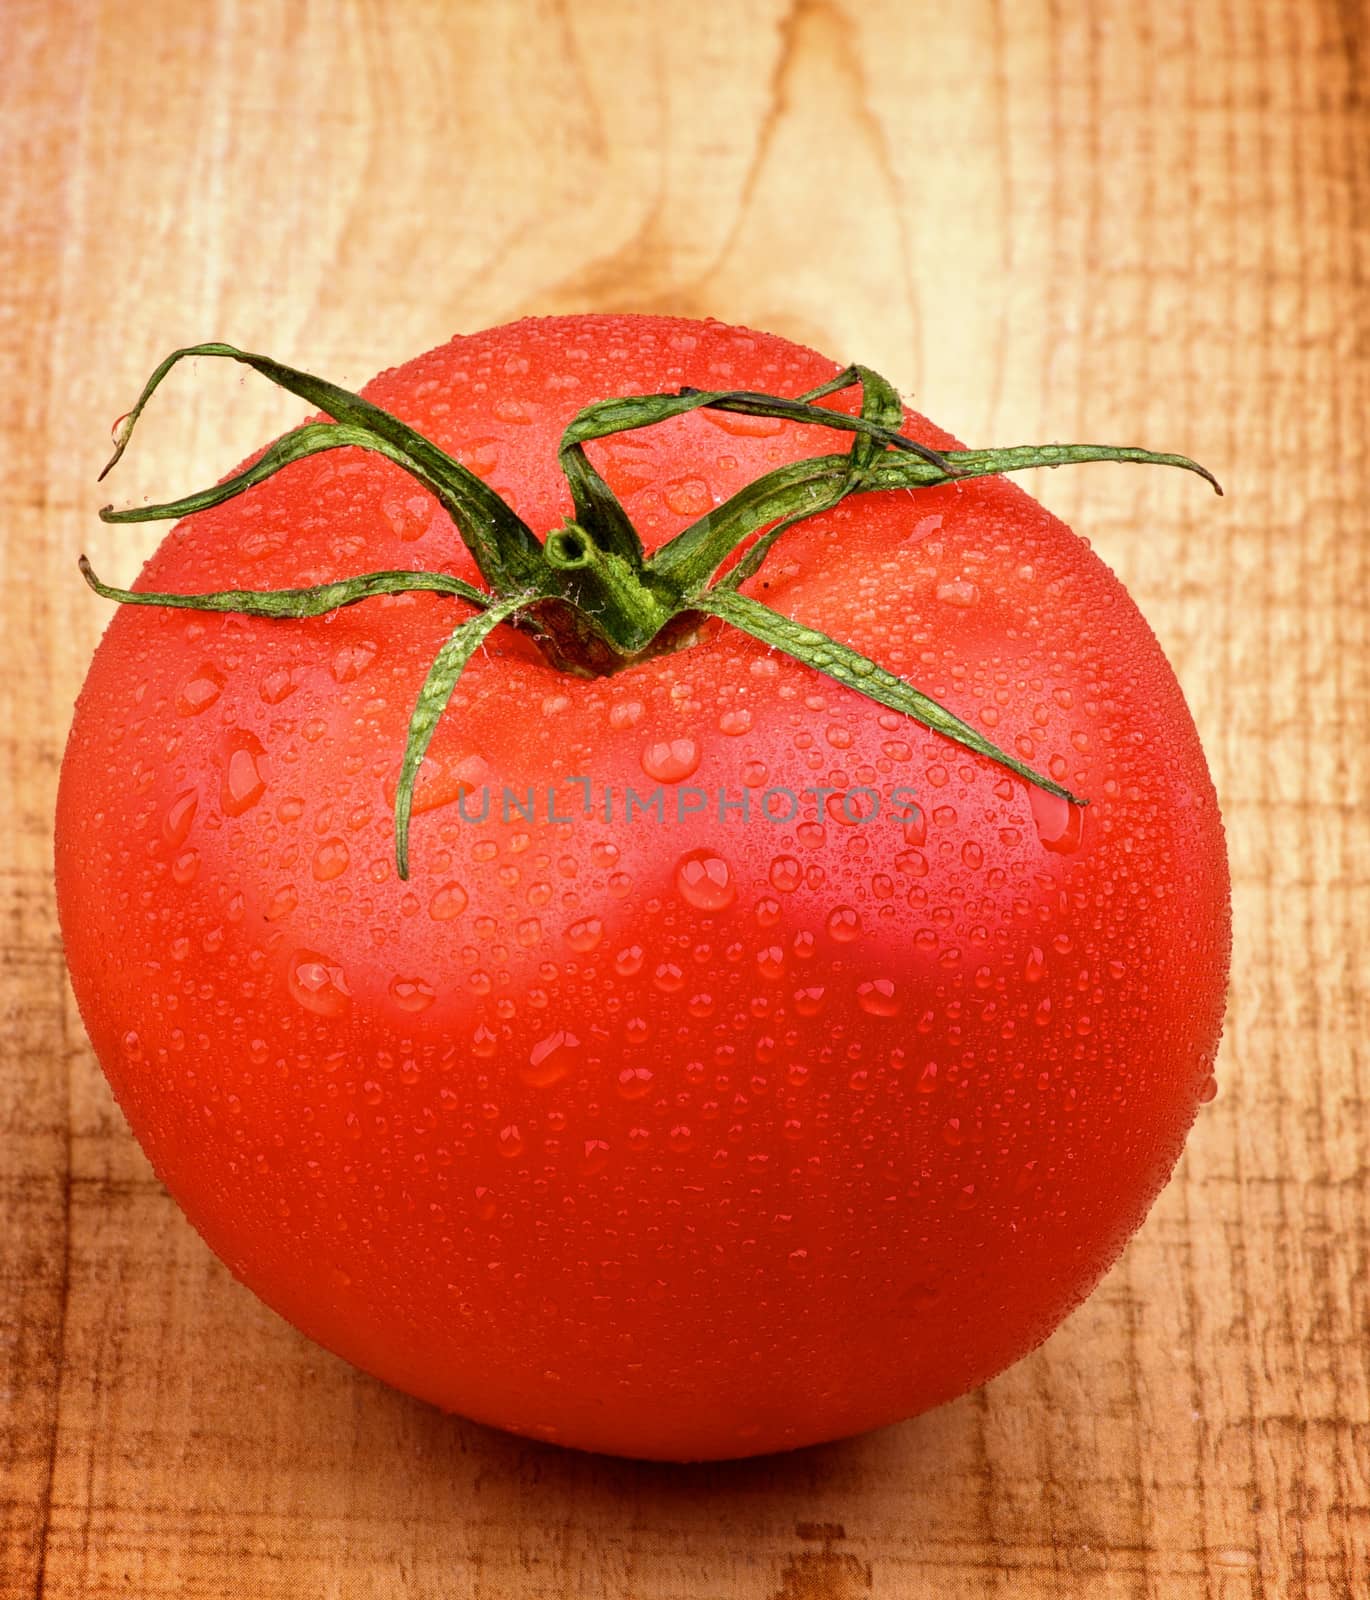 Big Ripe Tomato with Water Drops closeup on Rustic Wooden background